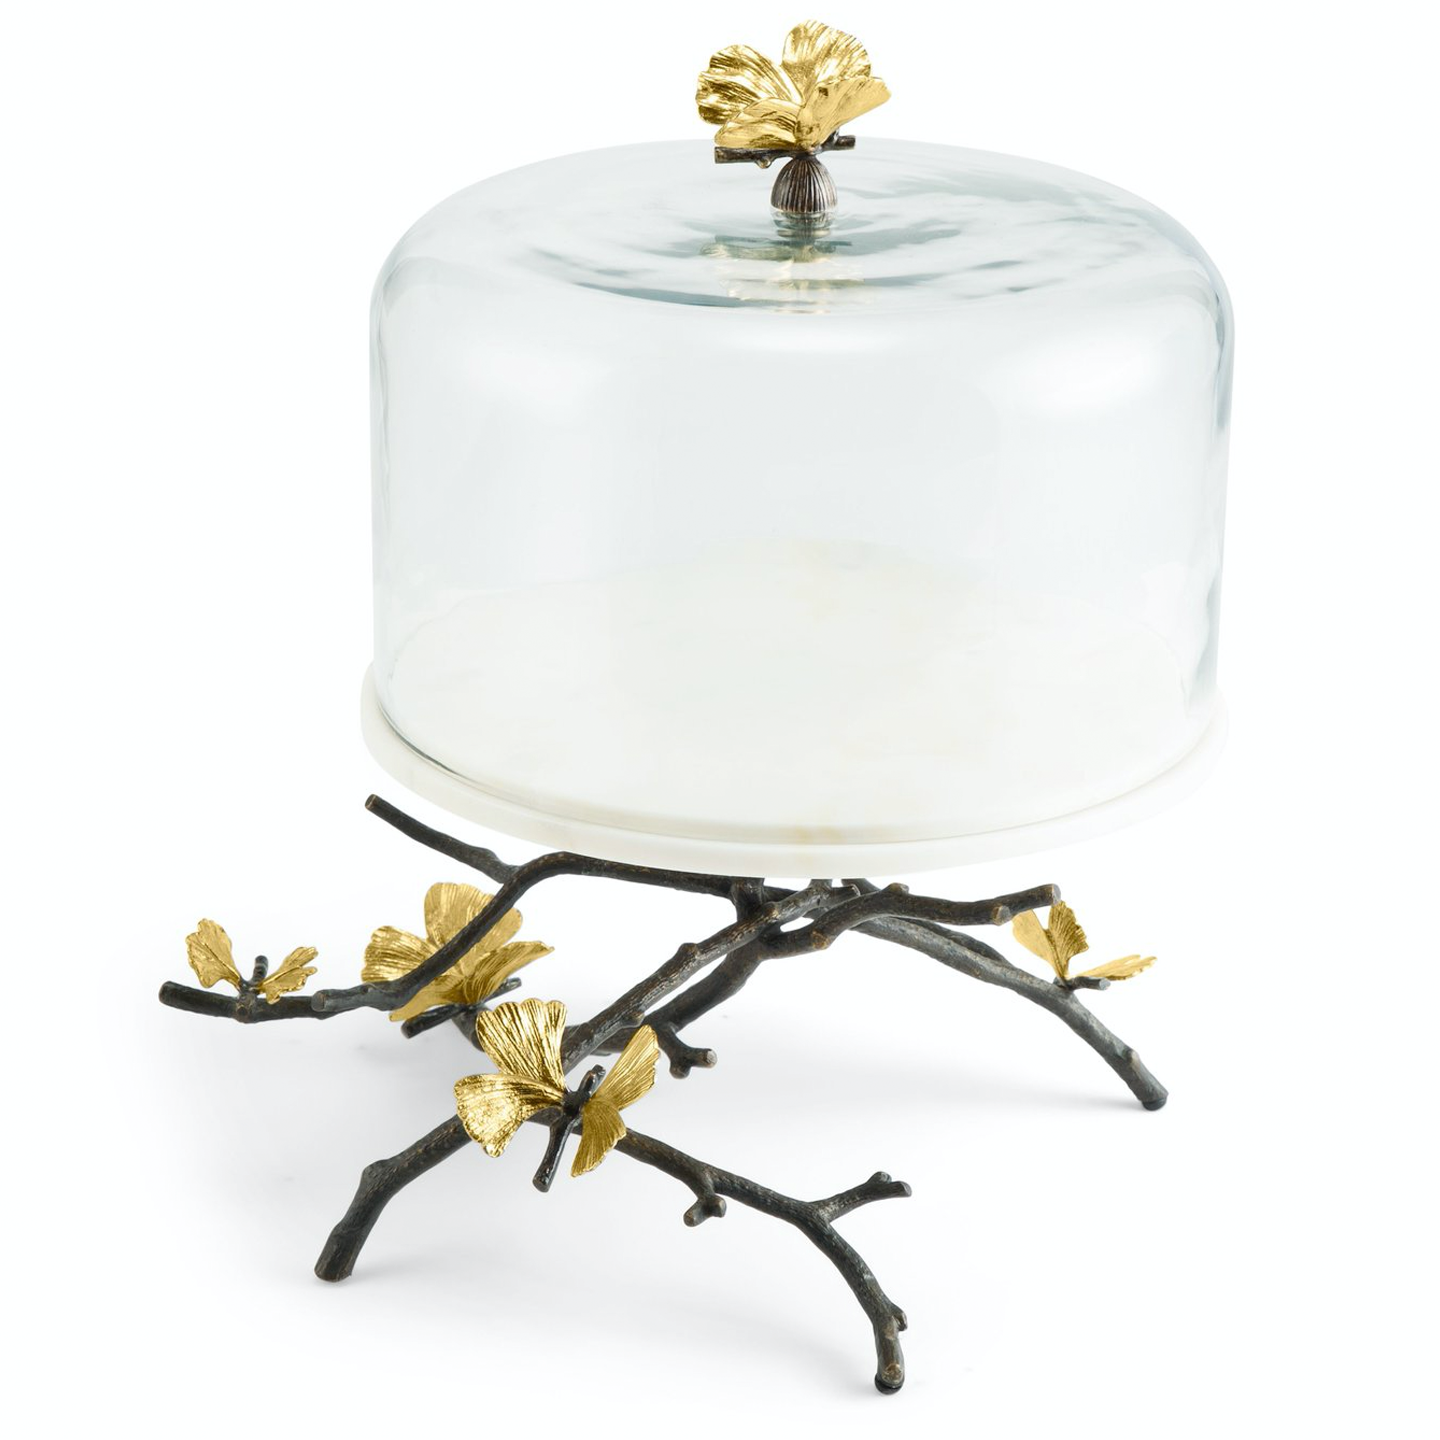 Butterfly Ginkgo Cake Stand with Dome, Michael Aram - RSVP Style